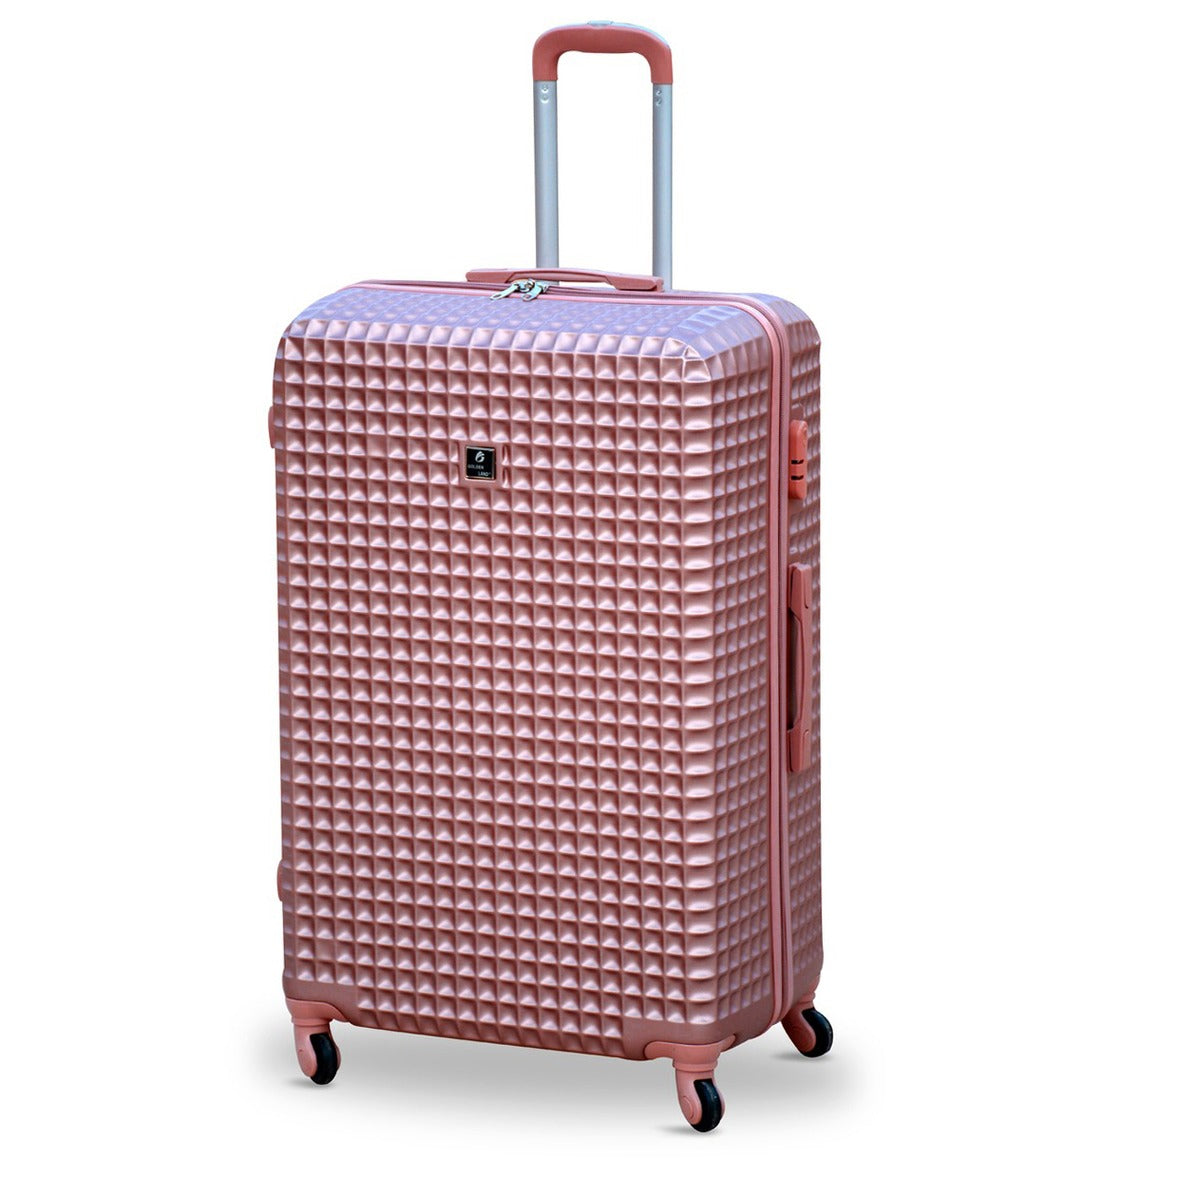 5 Piece Set 7" 20" 24" 28" 32 Inches Rose Gold Colour Square Cut ABS Lightweight Luggage Hard Case Trolley Bag | 2 Year Warranty